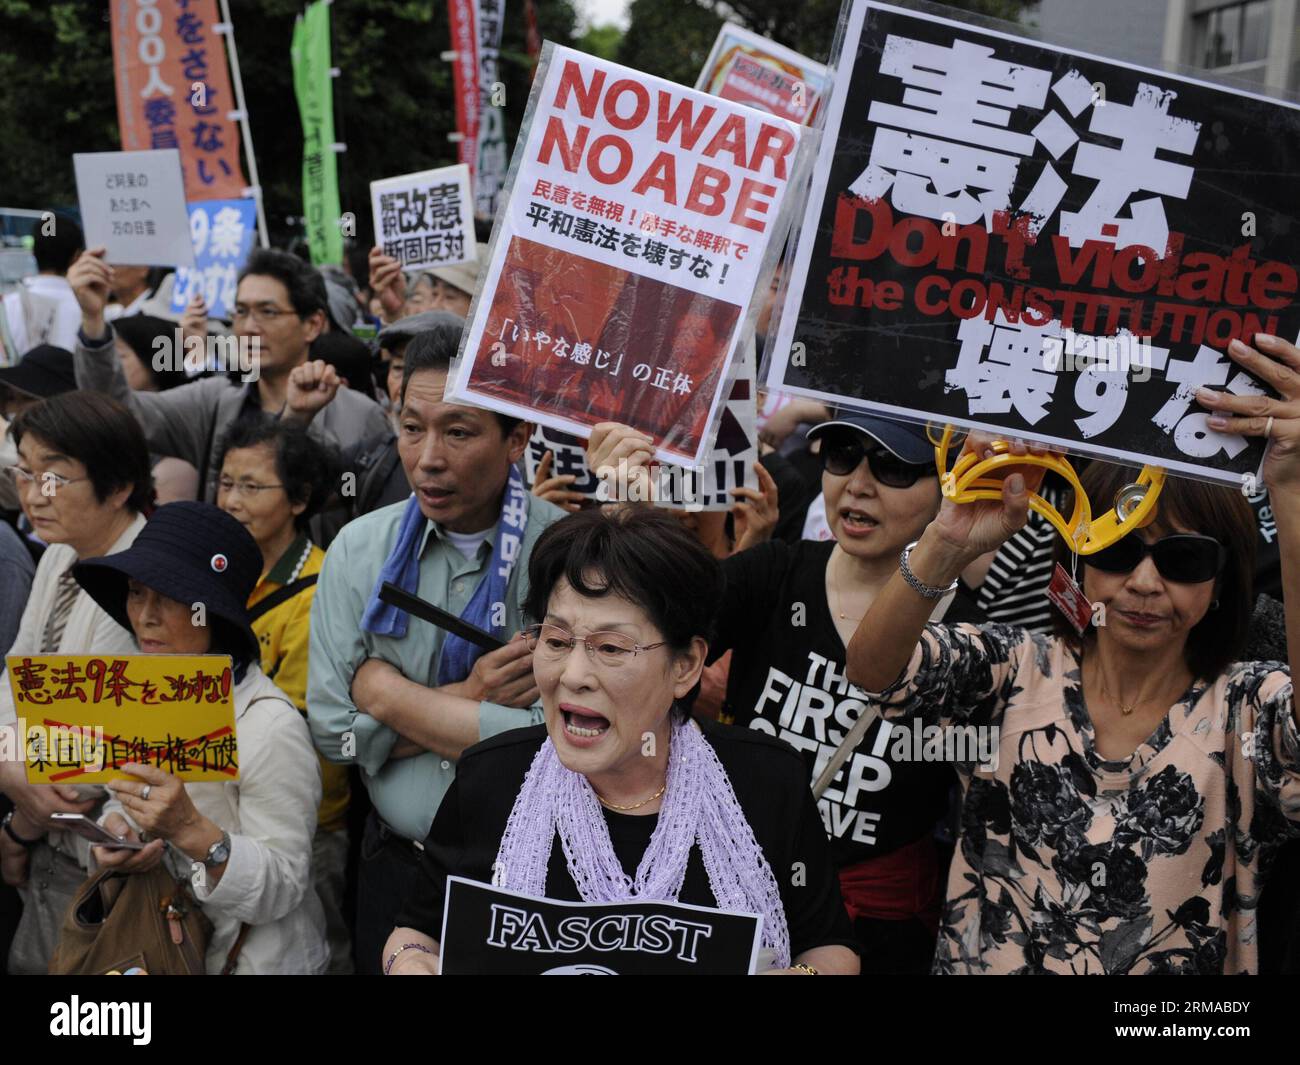 (140630) -- TOKYO, June 30, 2014 (Xinhua) -- People protest against the rights for collective self-defense in front of the Japanese Prime Minister s official residence in Tokyo, Japan, June 30, 2014. The Japanese government sought to get a green light from the Cabinet on July 1 for a resolution that will allow Japan to exercise collective self-defense rights through reinterpreting the country s pacifist Constitution. (Xinhua/Stringer) JAPAN-TOKYO-COLLECTIVE DEFENSE PUBLICATIONxNOTxINxCHN   Tokyo June 30 2014 XINHUA Celebrities Protest against The Rights for Collective Self Defense in Front of Stock Photo